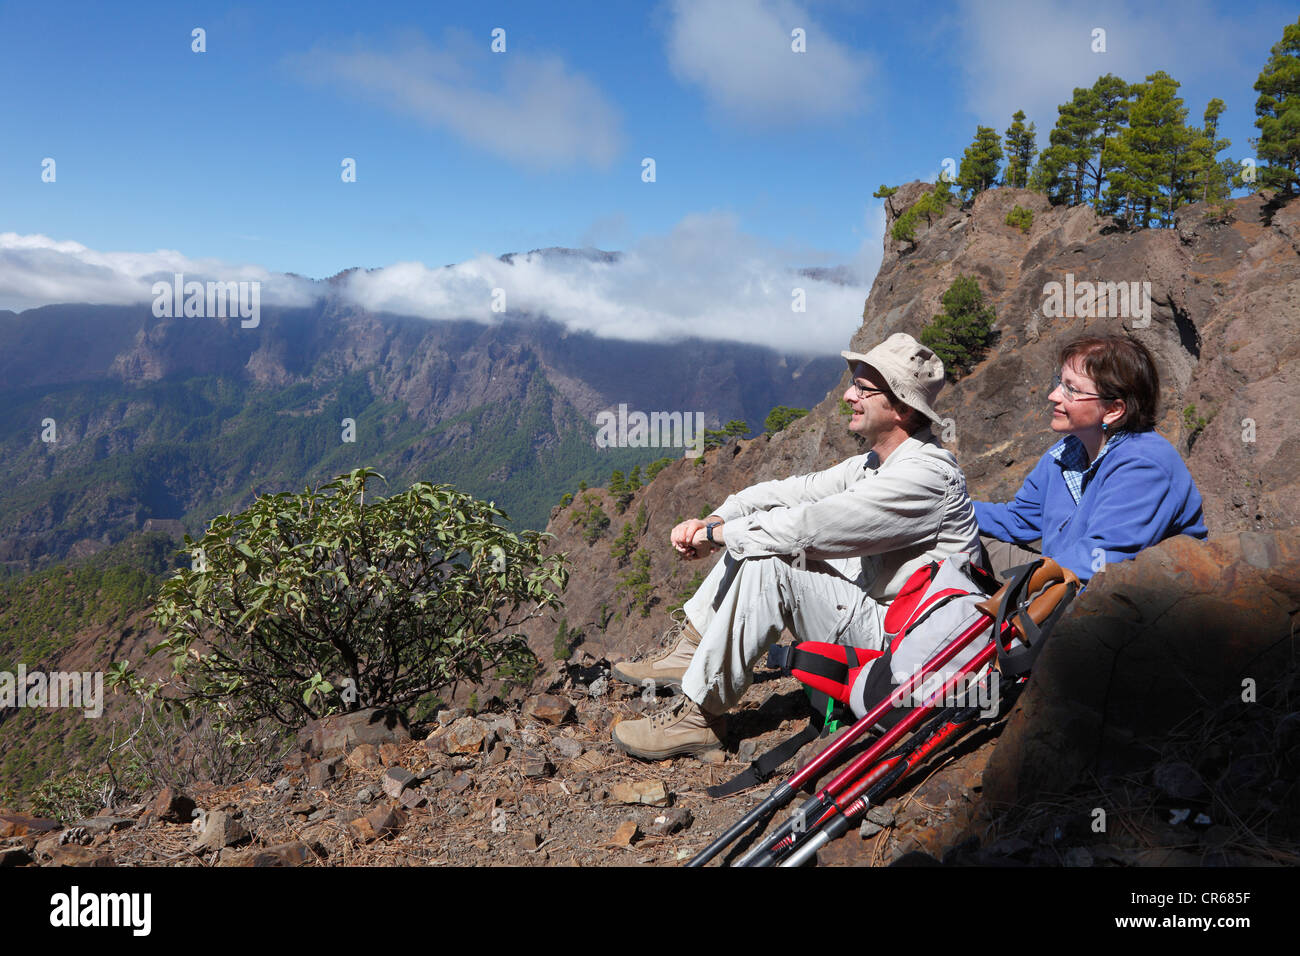 Spain, Canary Islands, La Palma, Man and woman looking at view Stock Photo